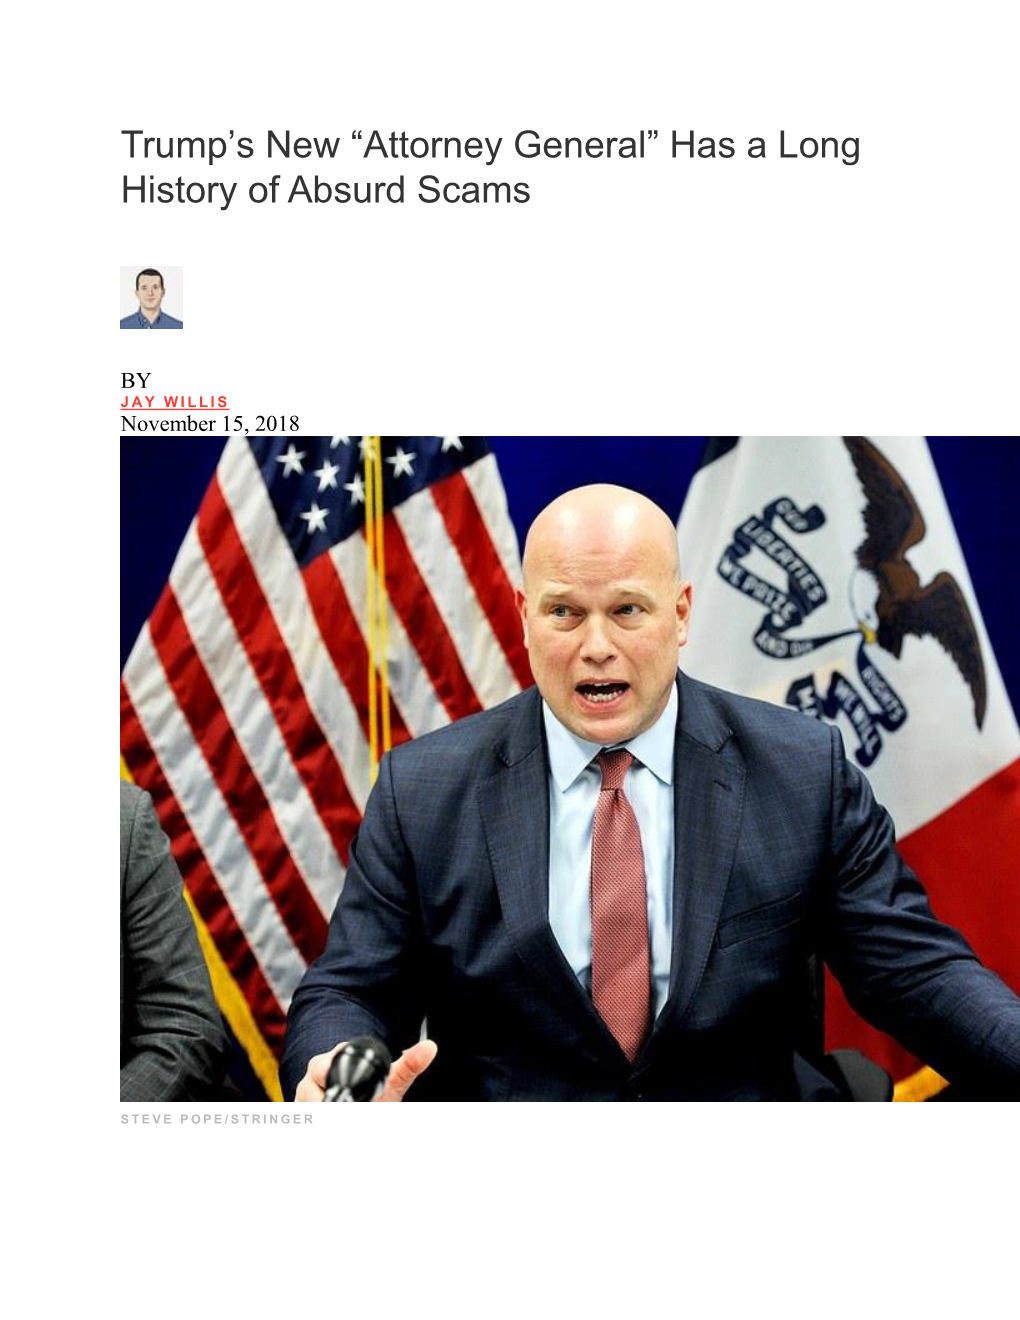 Attorney General” Has a Long History of Absurd Scams